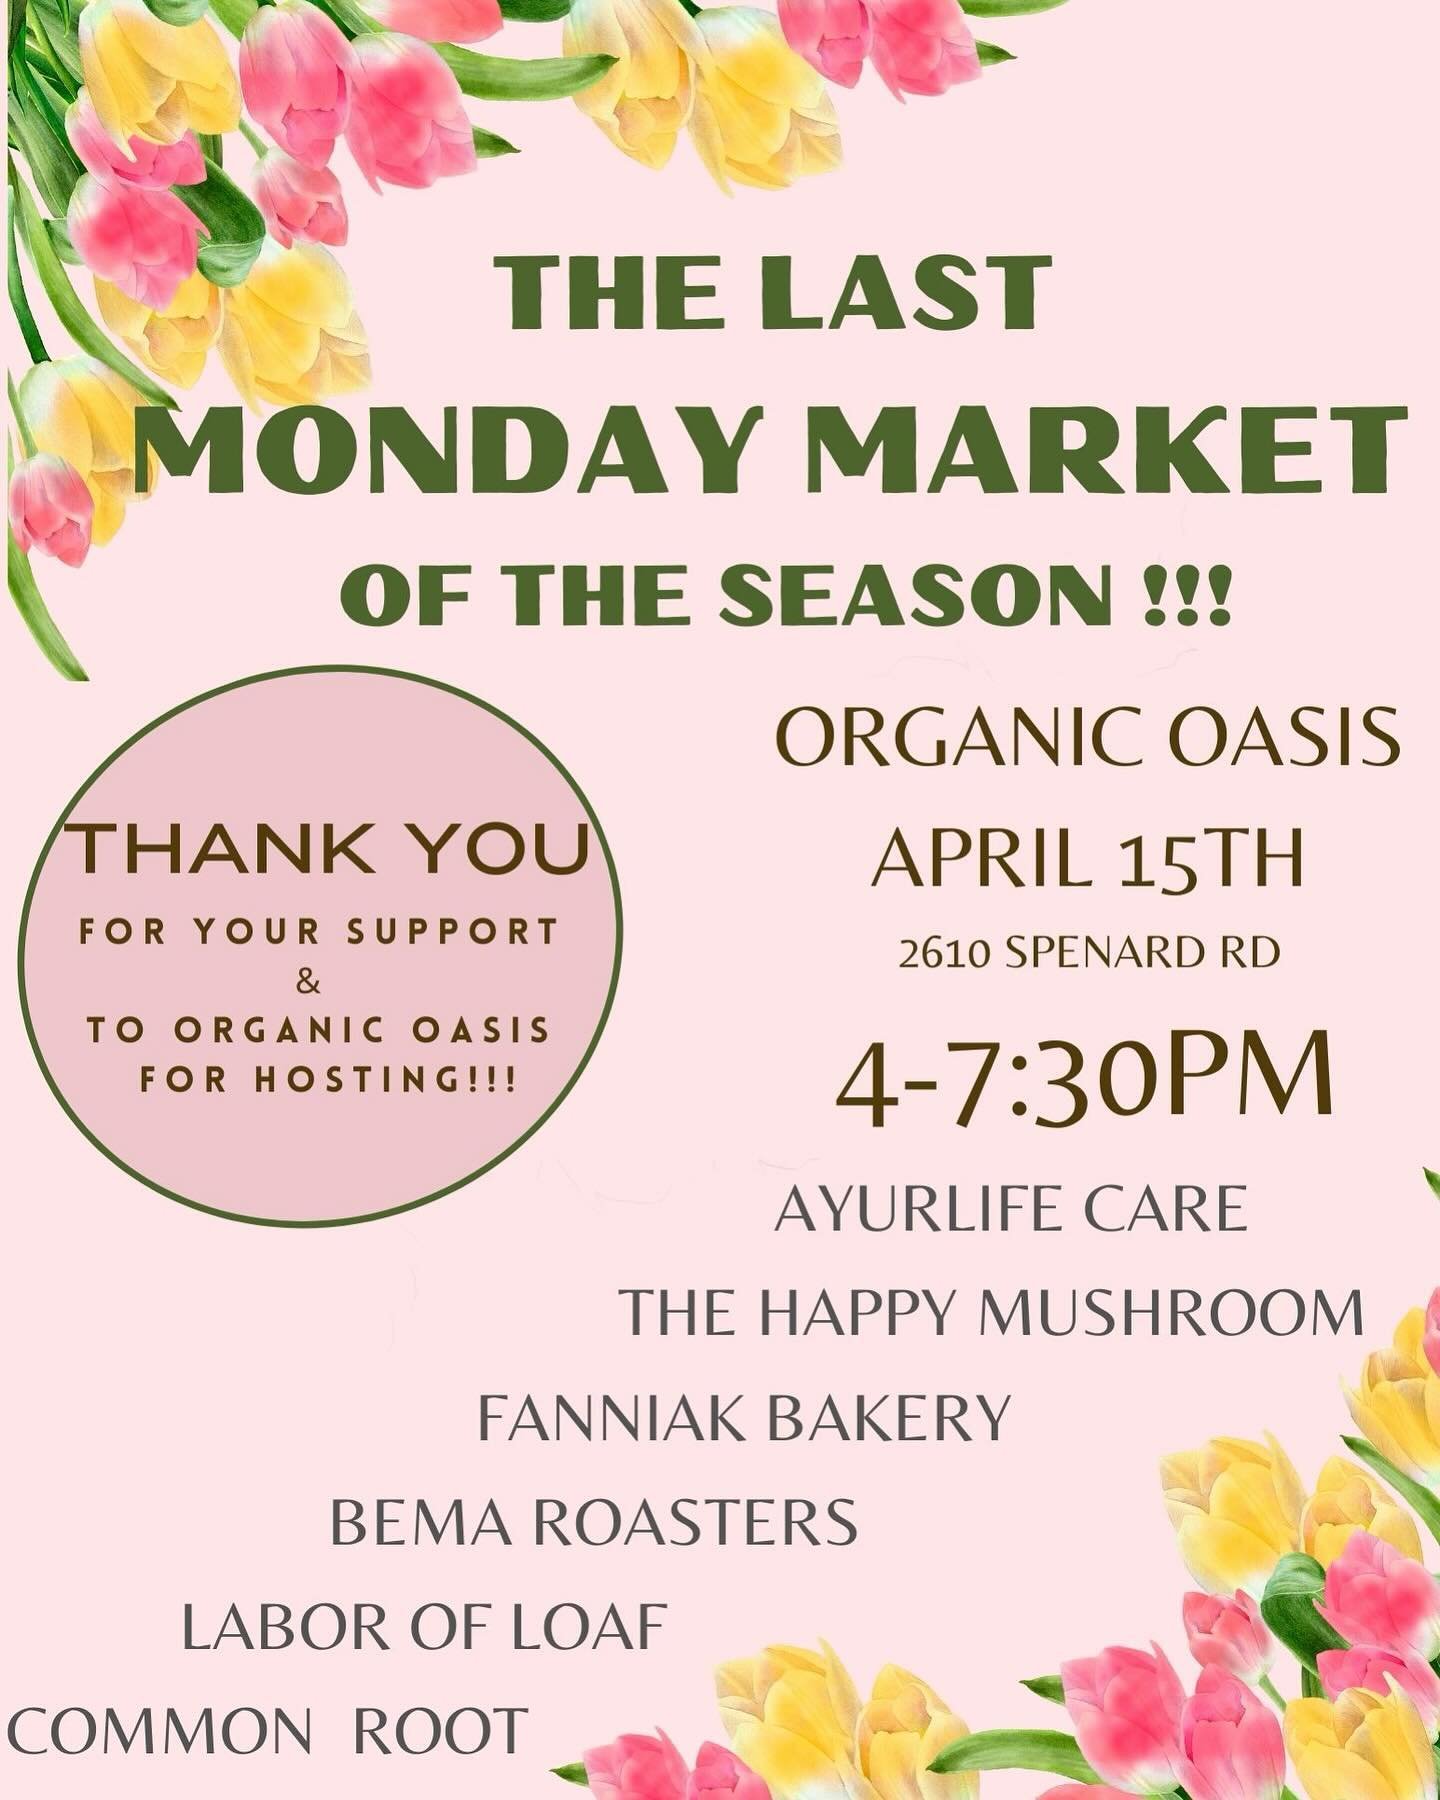 Mushrooms!!!! Free Money!!!!! Come on Anchorage, don&rsquo;t be shy!!!!
Join me for our last Monday Market of this winter season at Organic Oasis on April 15th from 4-7.30
We will have mushrooms, teas, ferments, fresh breads, desserts and more. 
Ente